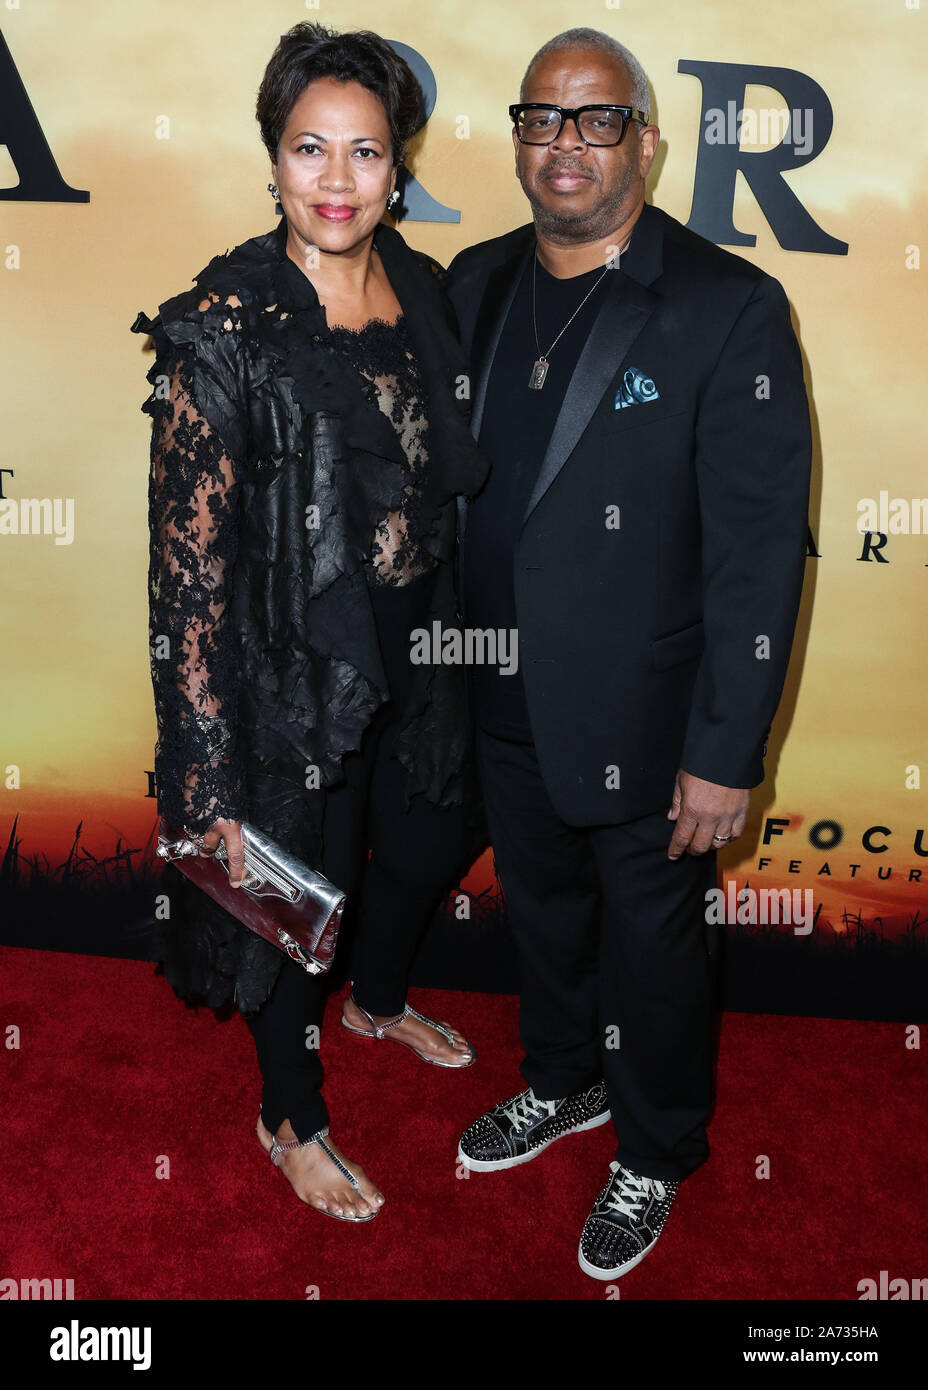 Los Angeles, United States. 29th Oct, 2019. LOS ANGELES, CALIFORNIA, USA - OCTOBER 29: Robin Burgess and Terence Blanchard arrive at the Los Angeles Premiere Of Focus Features' 'Harriet' held at The Orpheum Theatre on October 29, 2019 in Los Angeles, California, United States. (Photo by Xavier Collin/Image Press Agency) Credit: Image Press Agency/Alamy Live News Stock Photo